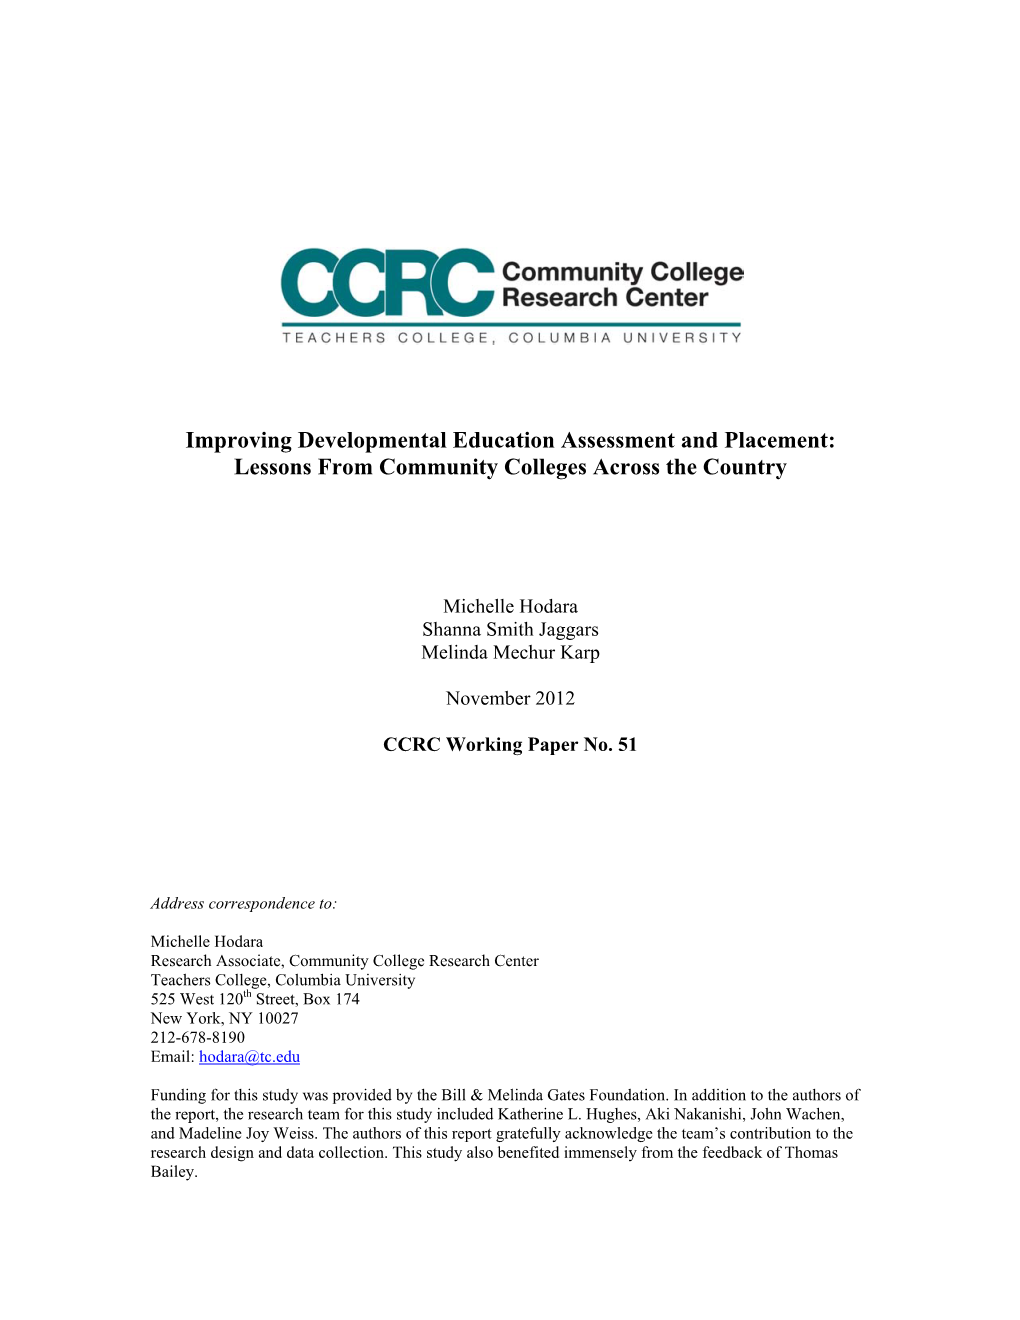 Improving Developmental Education Assessment and Placement: Lessons from Community Colleges Across the Country